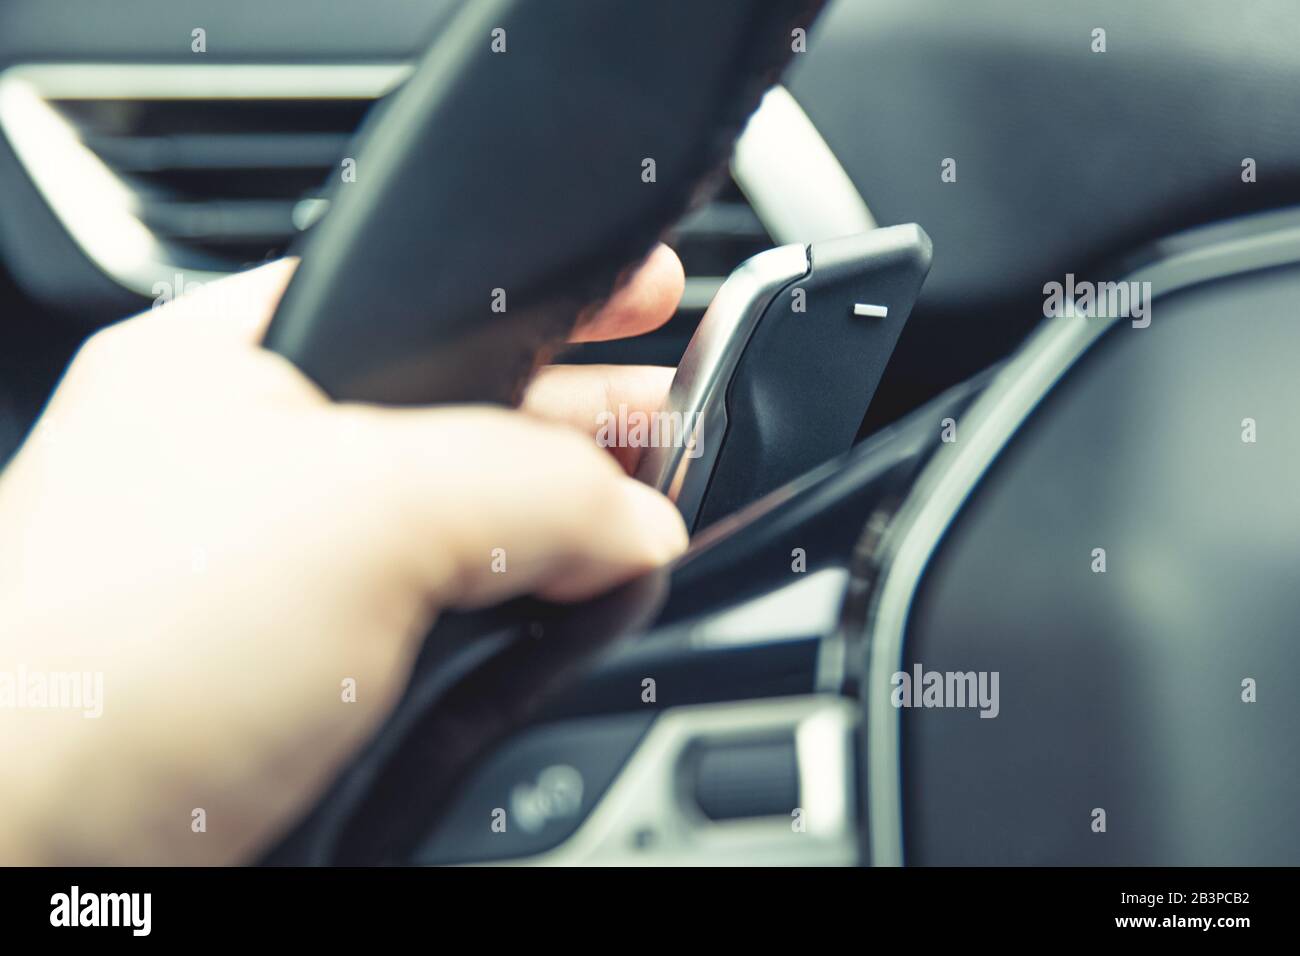 Gear down leverage in sequence gearbox in modern car. Stock Photo